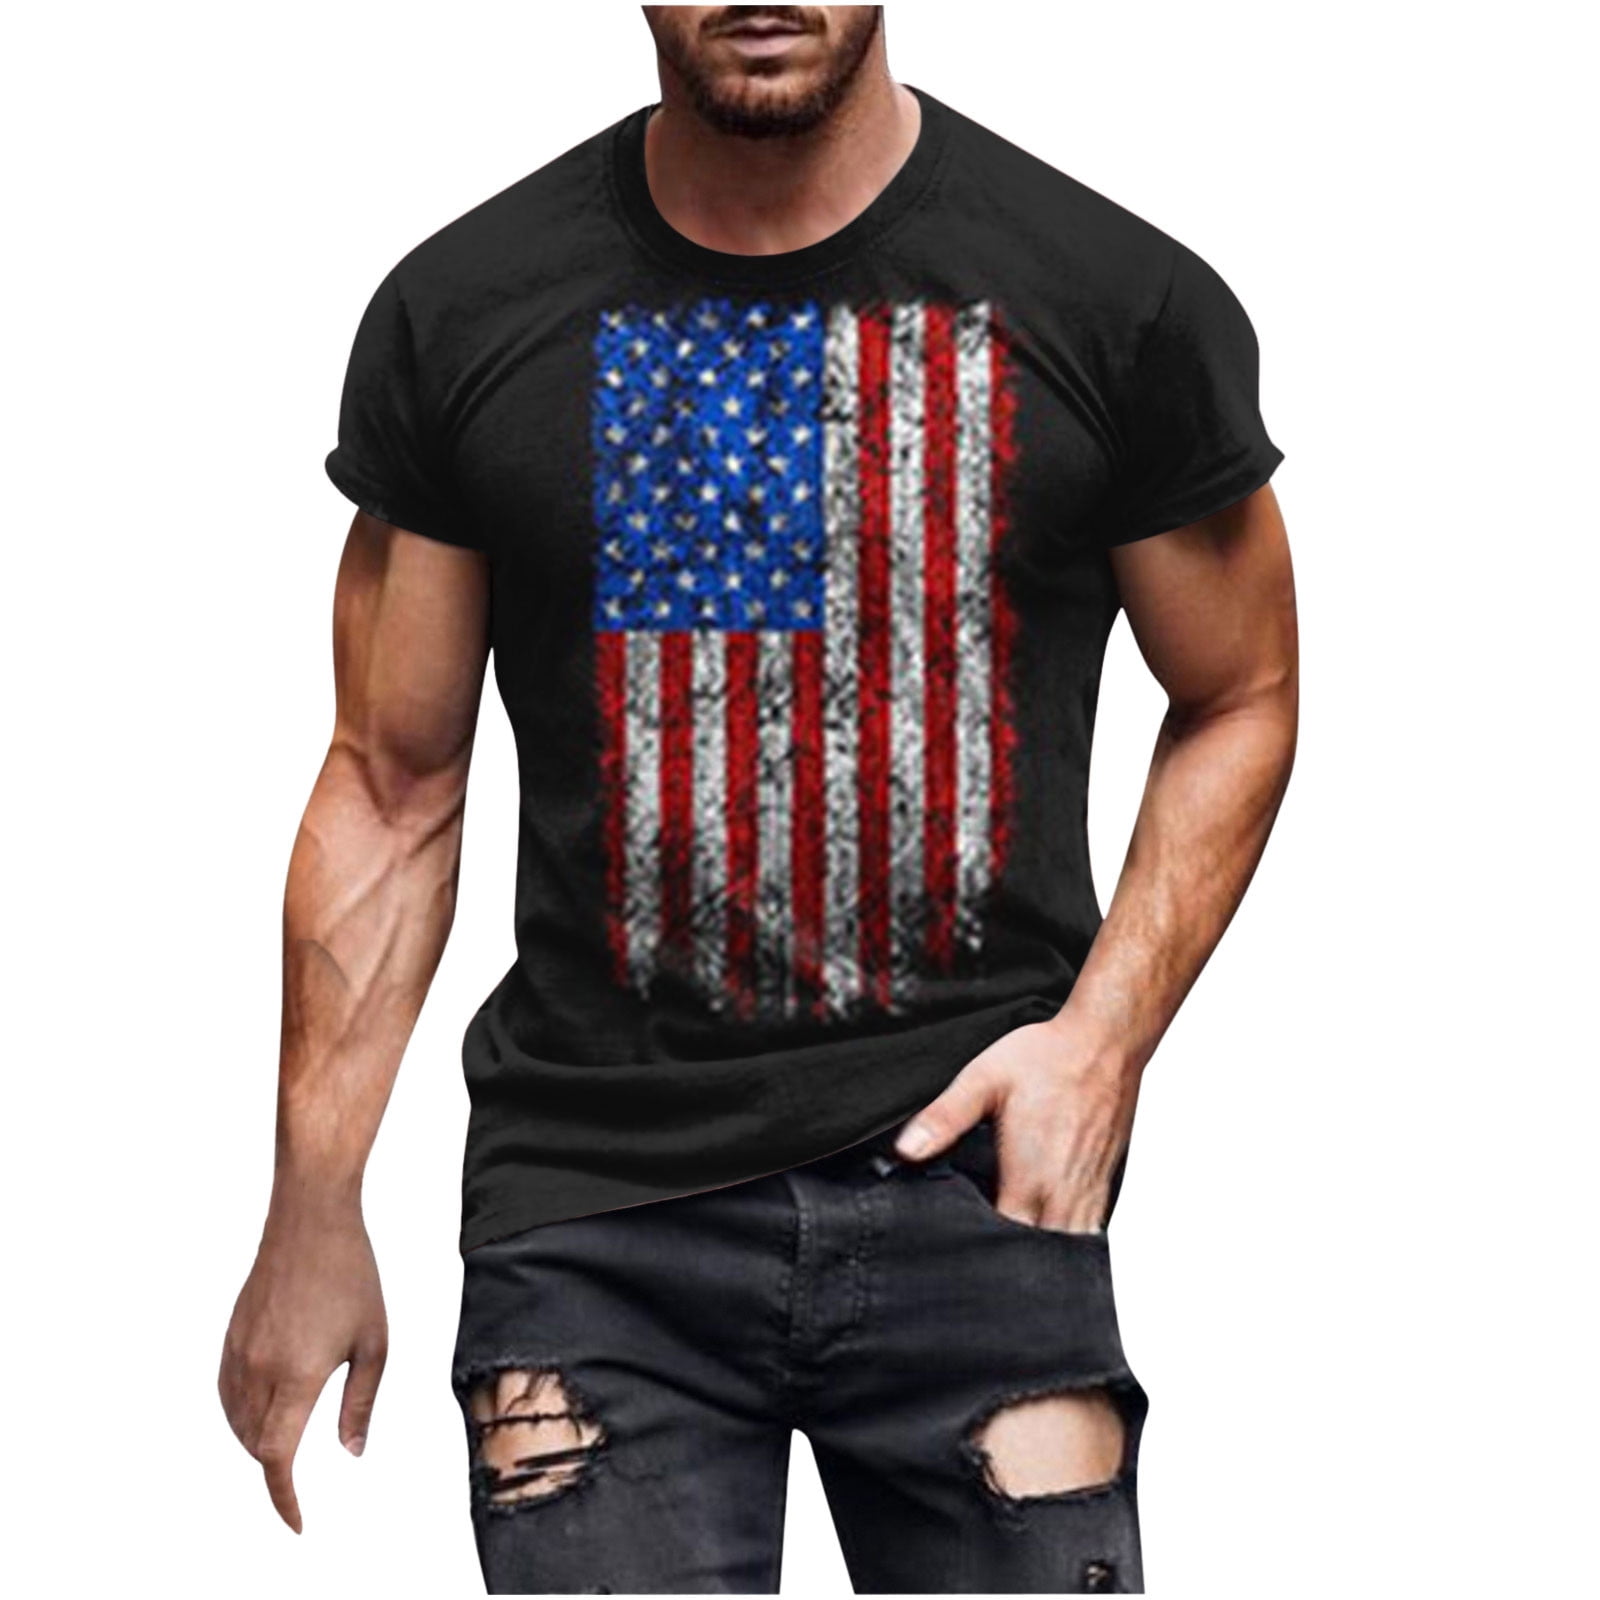 DDAPJ pyju Patriotic Short Sleeve Shirt for Men,Cool Design Street Style  Slim Fit Muscle Tee,4th of July Memorial Day Shirts